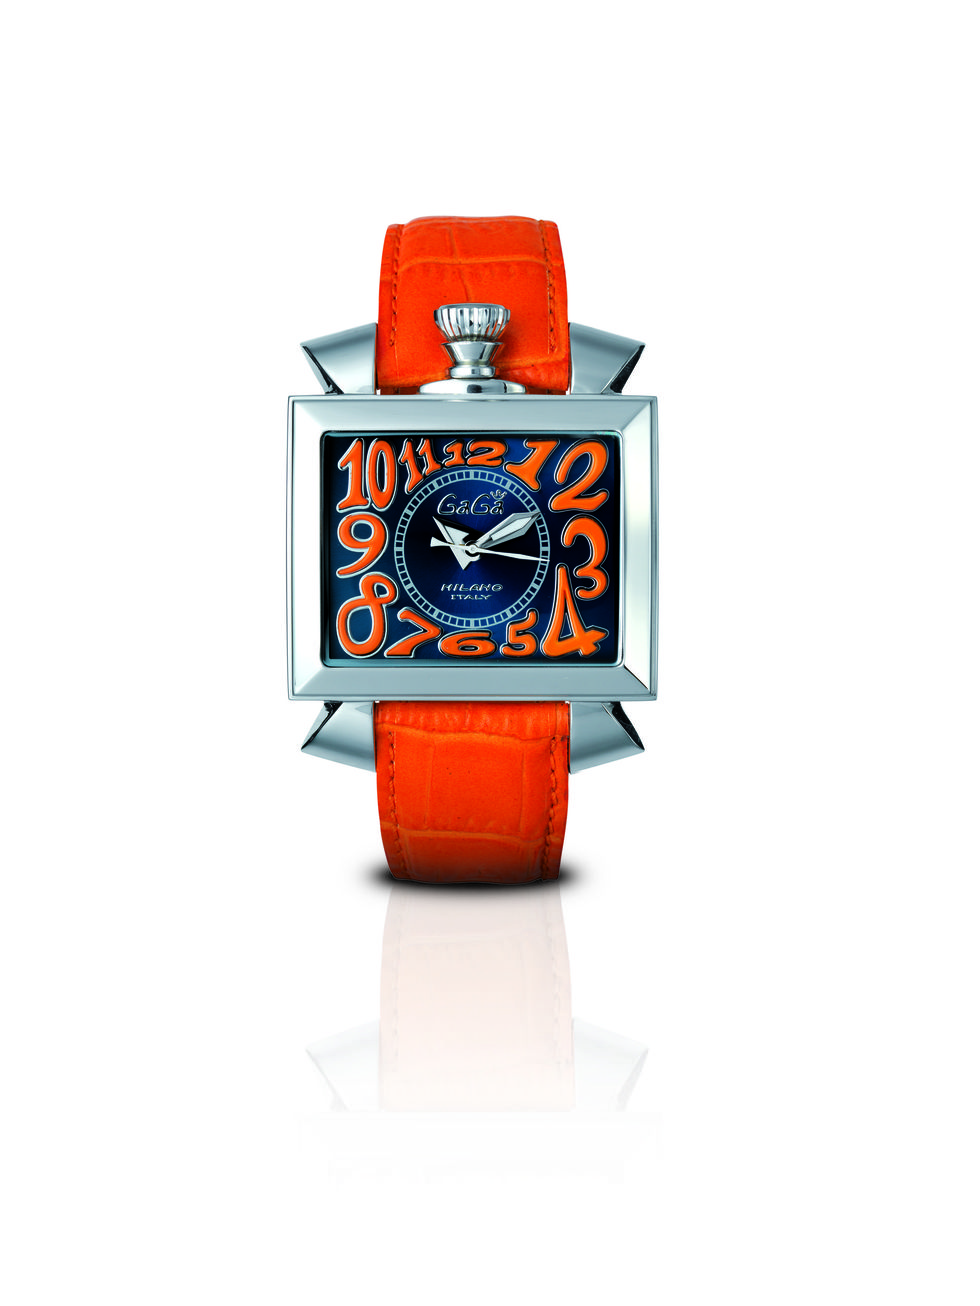 Product, Orange, Watch, Display device, Clock, Rectangle, Analog watch, Strap, Still life photography, Square, 